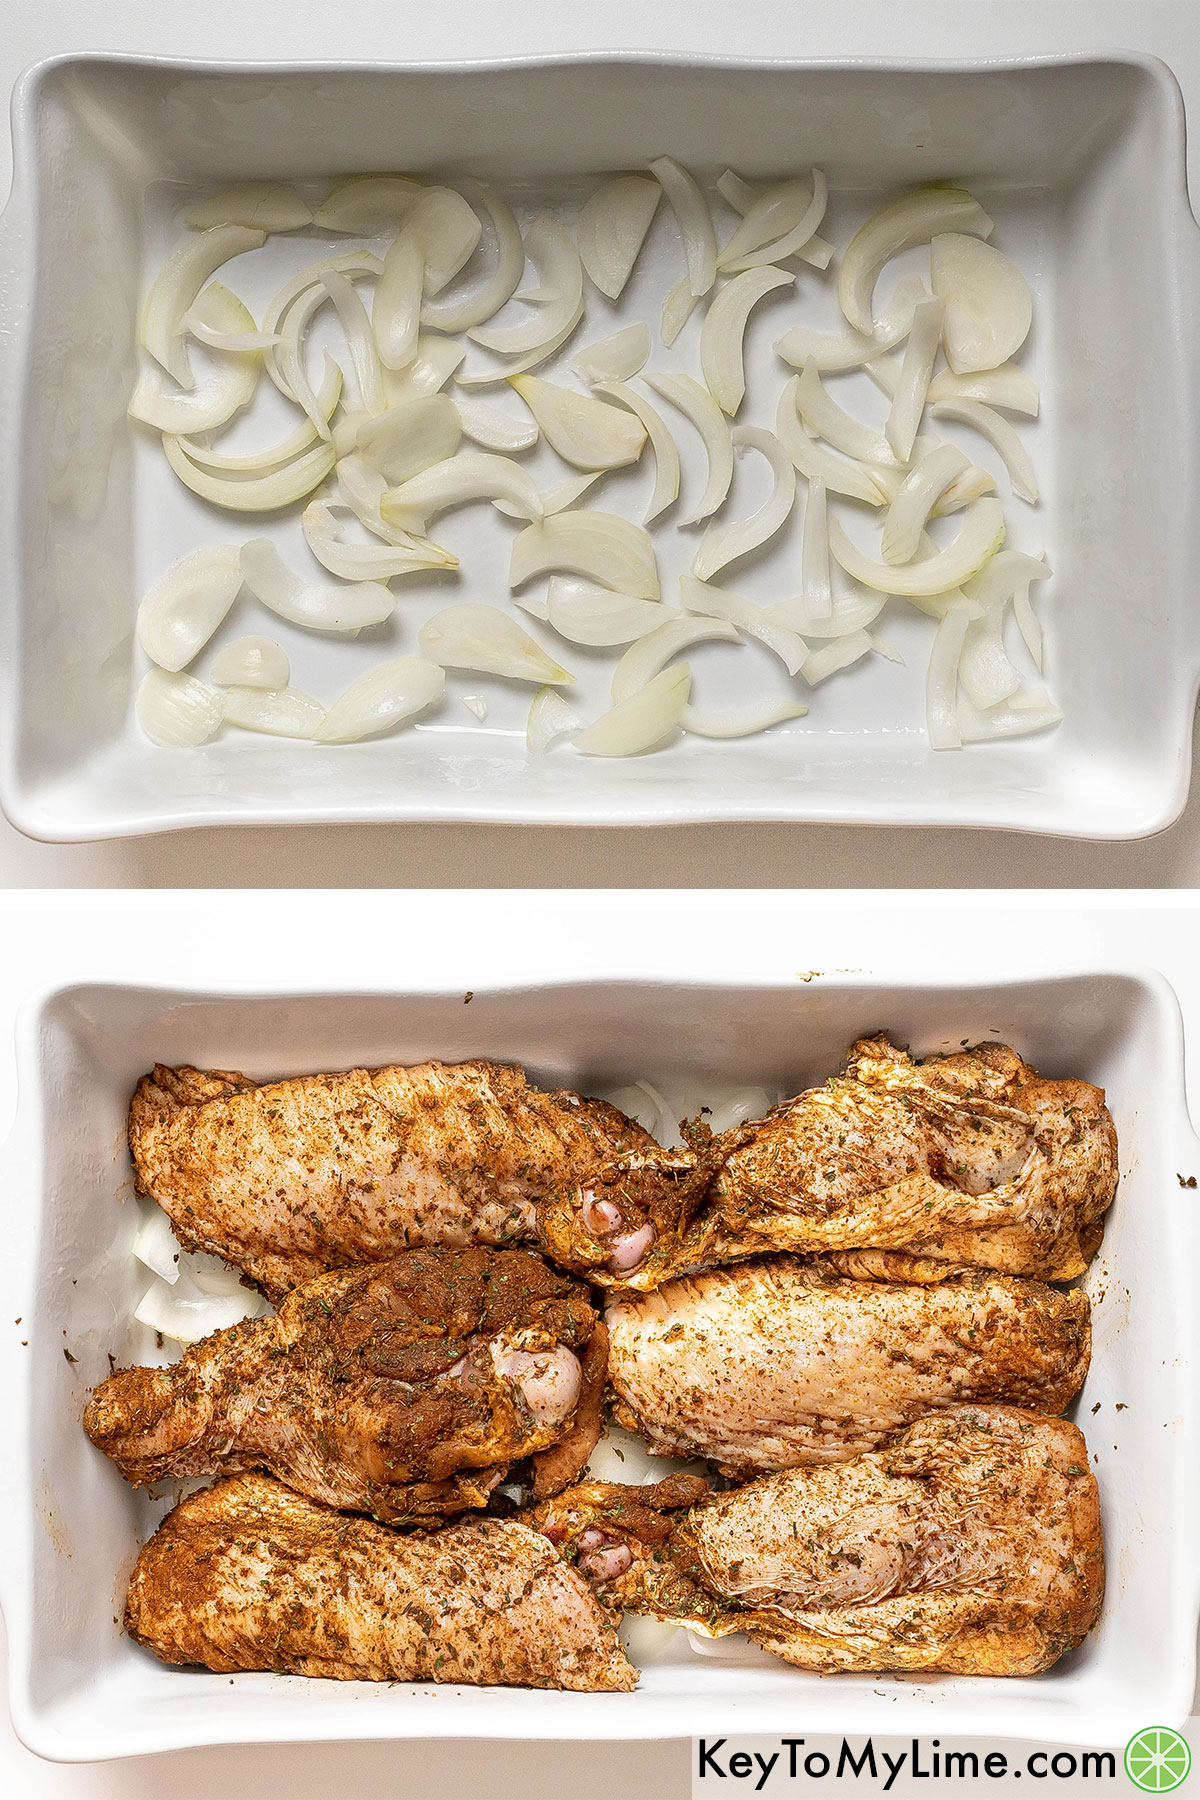 Adding a layer of onions to a casserole dish, and then placing the coated turkey wings over top.